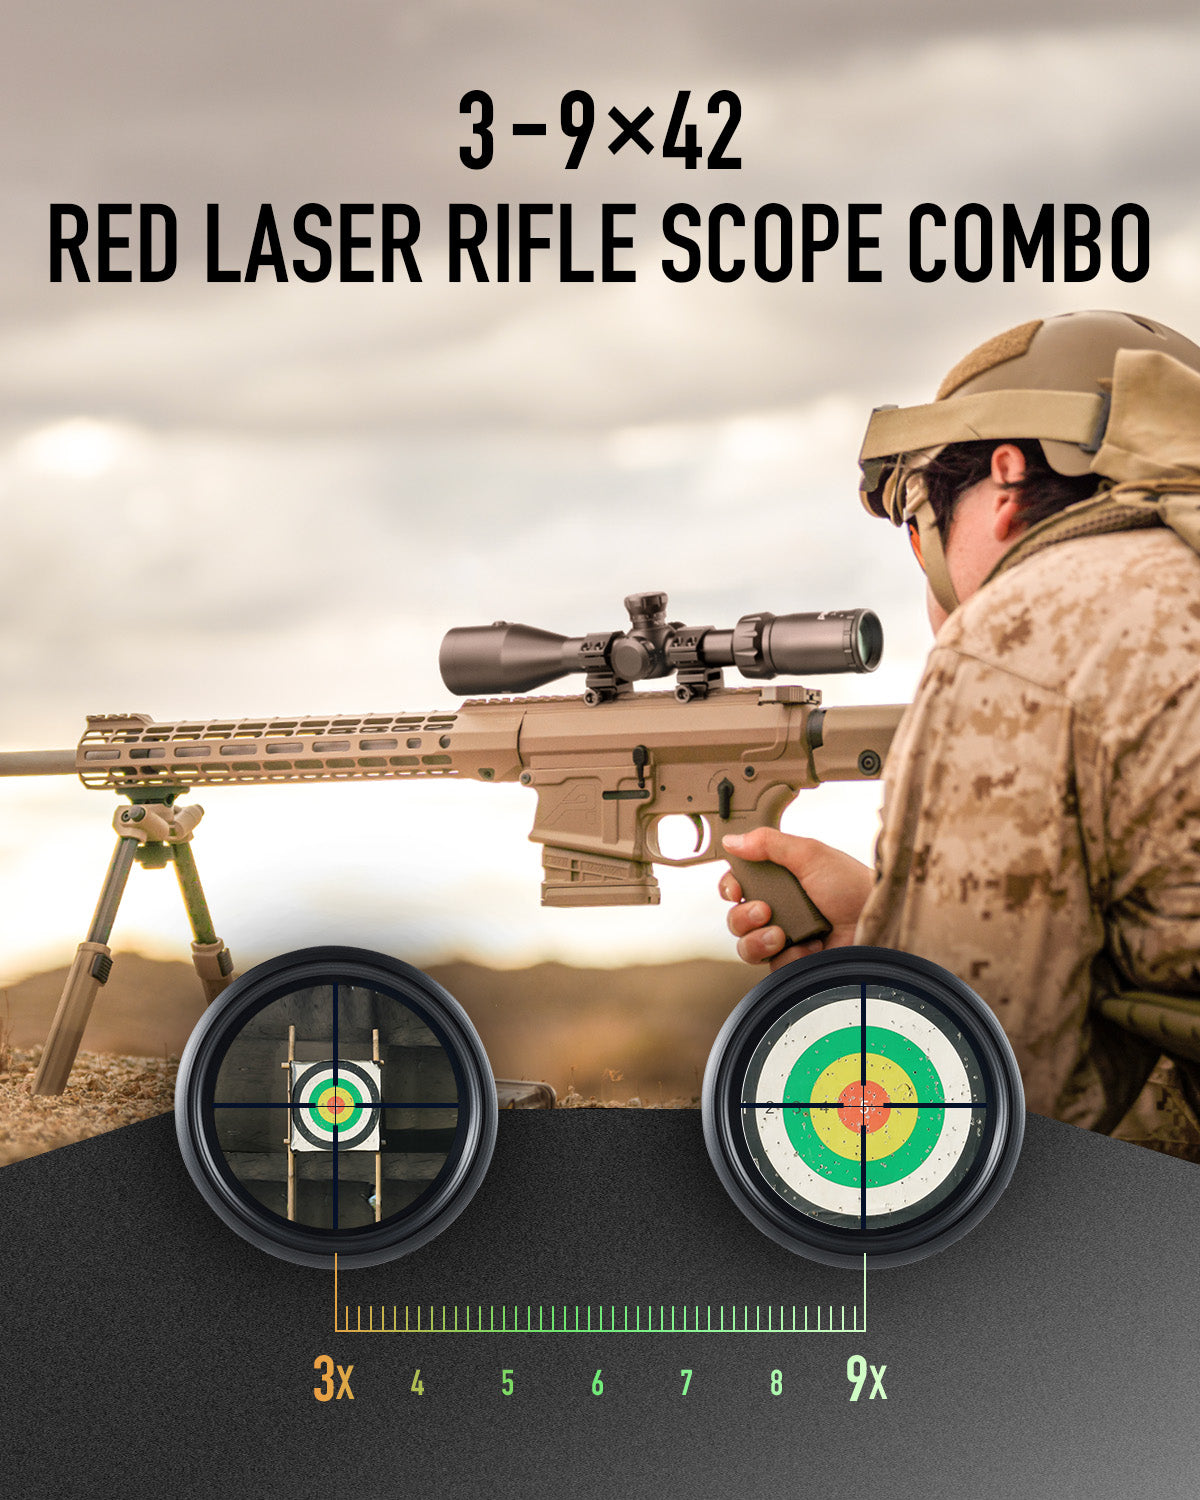 【BUY 1 GET 1 FREE RED DOT GIFT】3-9x42 Mil Dot Tactical Hunting Rifle Scope with Laser